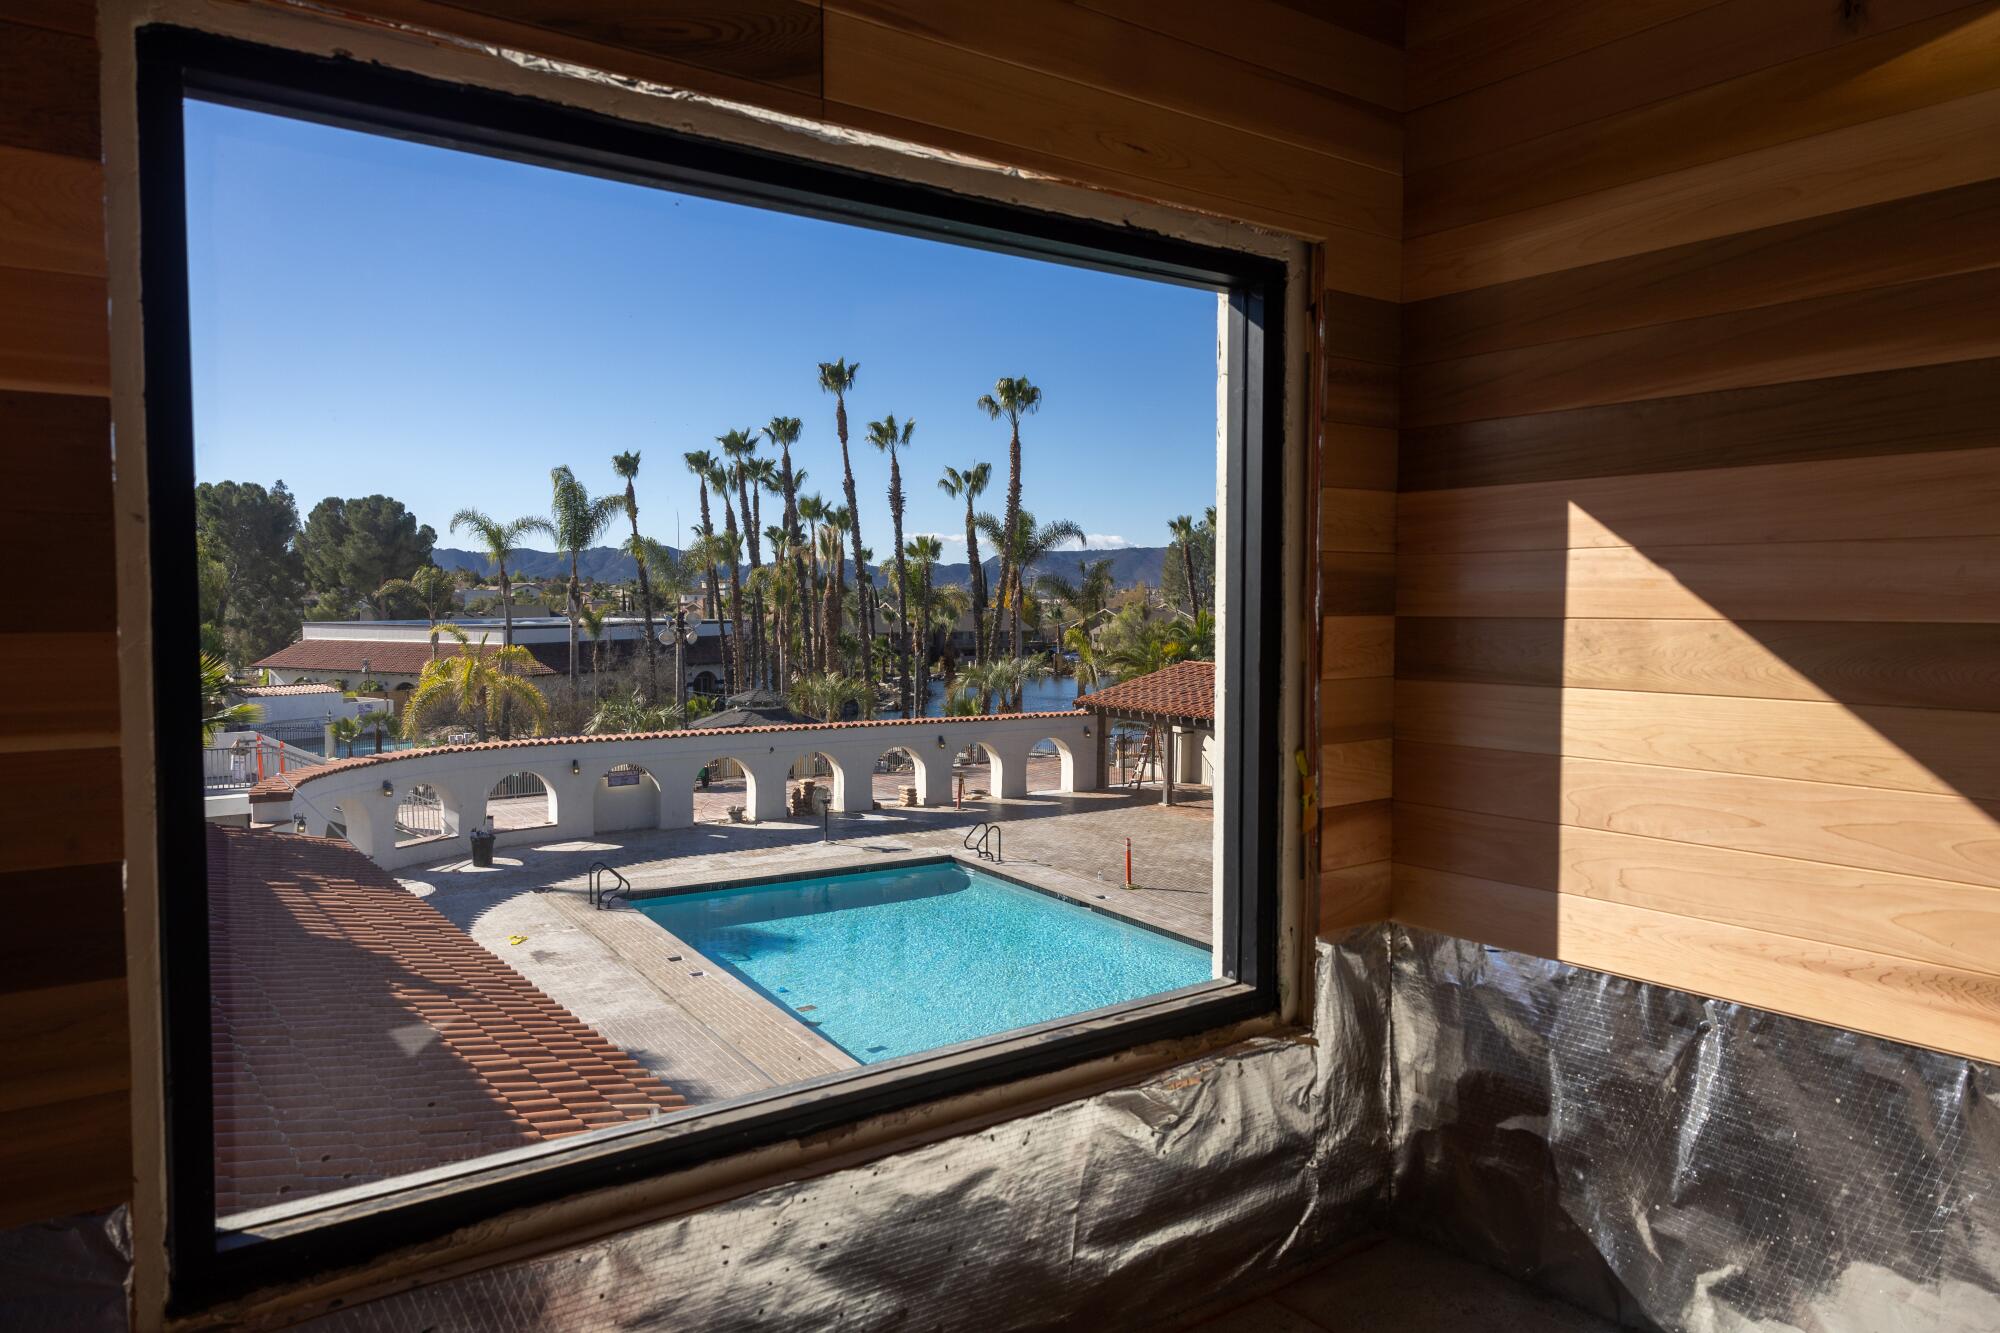 The view from the sauna under construction provides a scenic view of Murrieta Hot Springs Resort. 